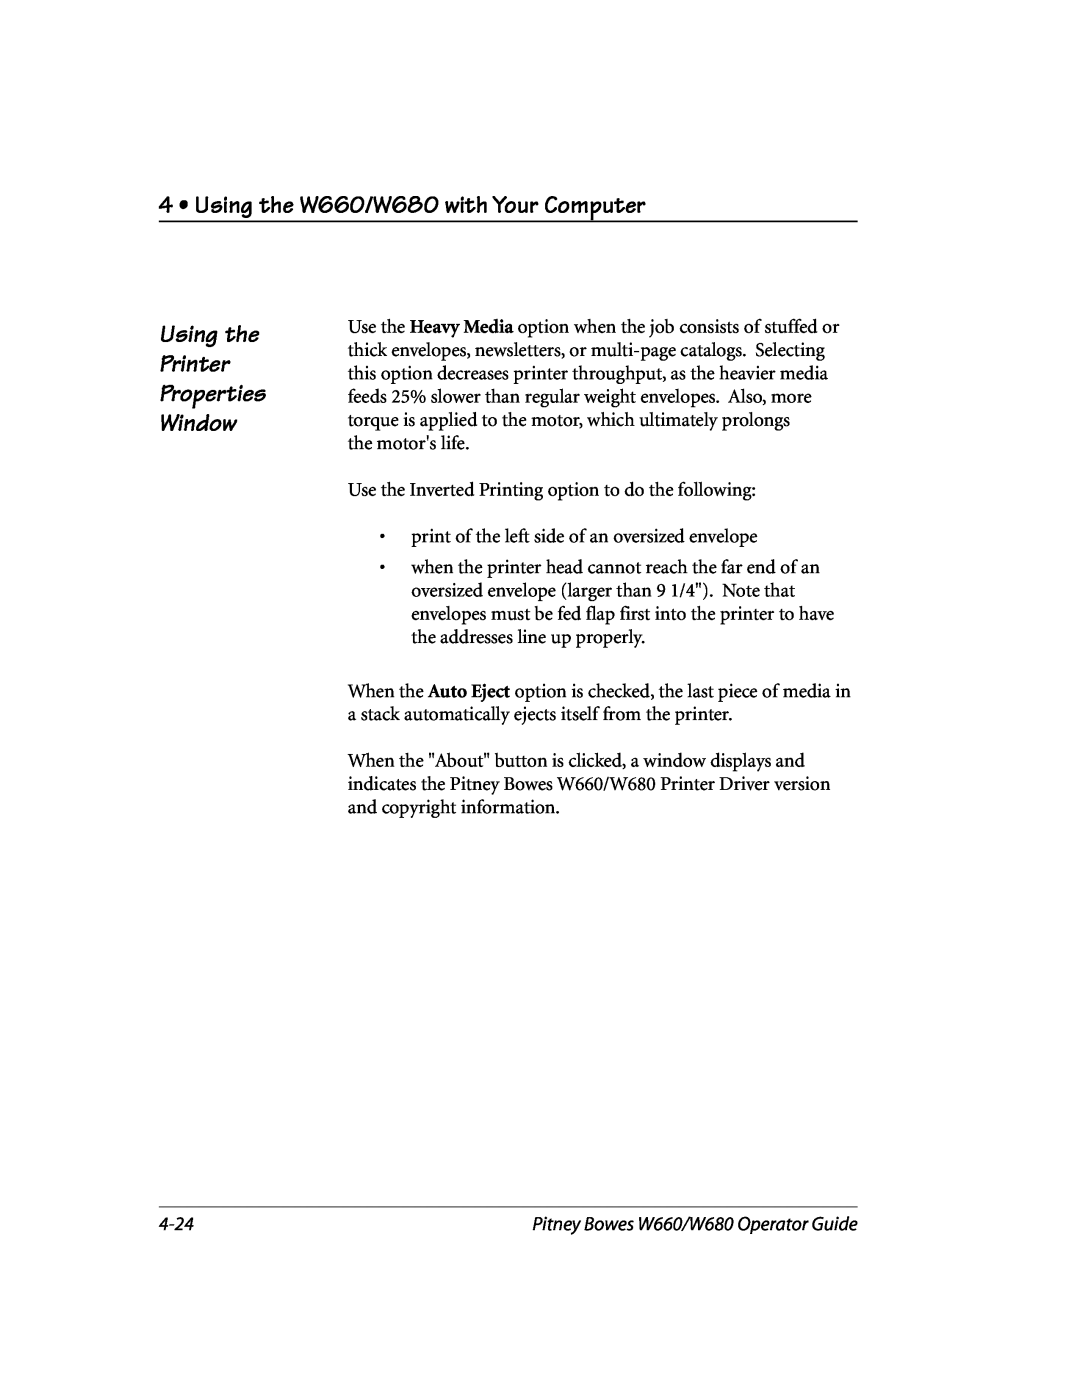 Pitney Bowes manual Using the W660/W680 with Your Computer, Using the Printer Properties Window 